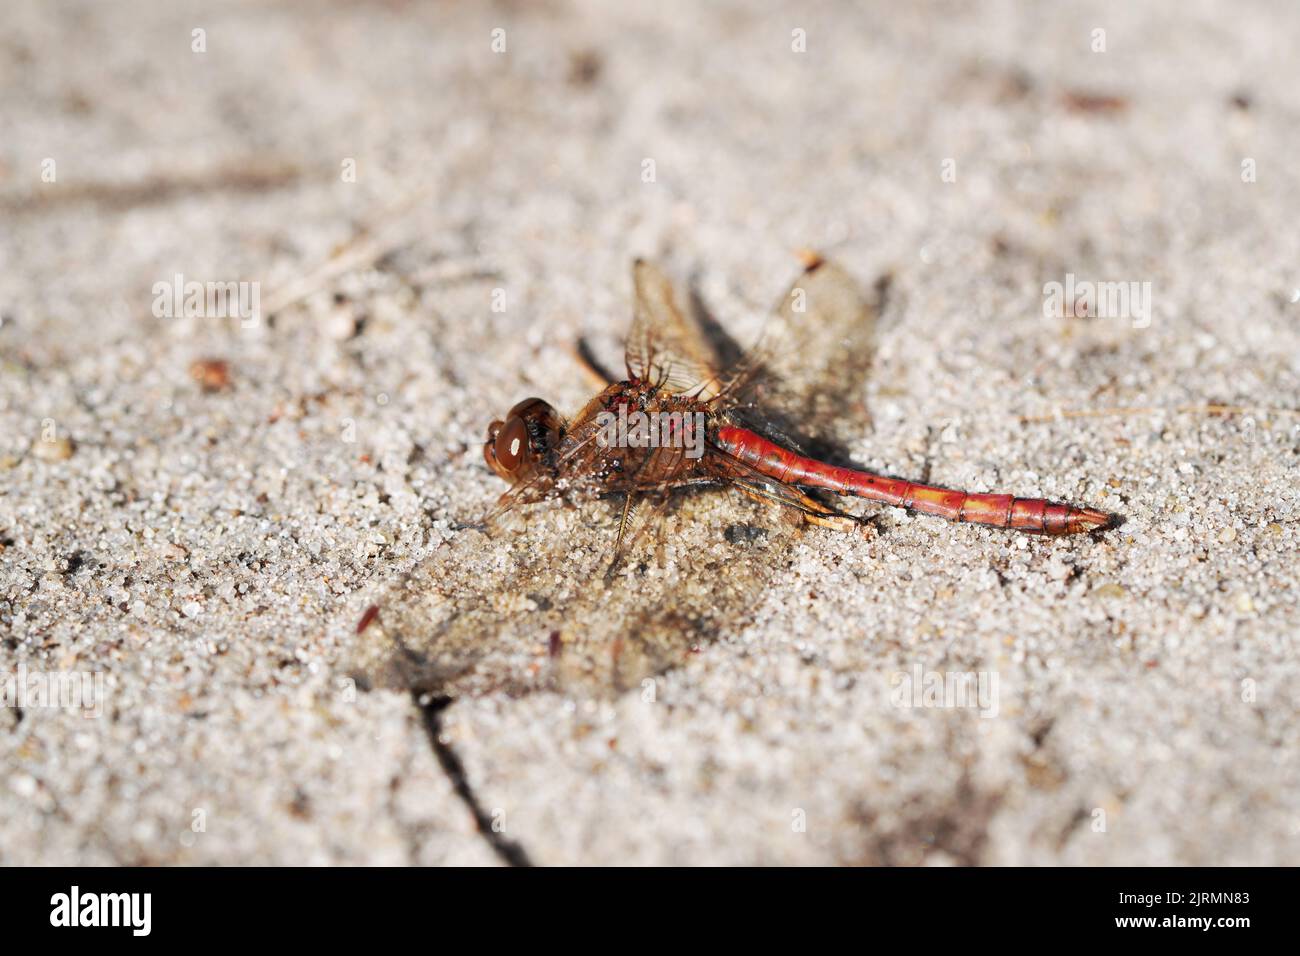 A dragonfly sits on the sandy bottom. Insect close up. Stock Photo